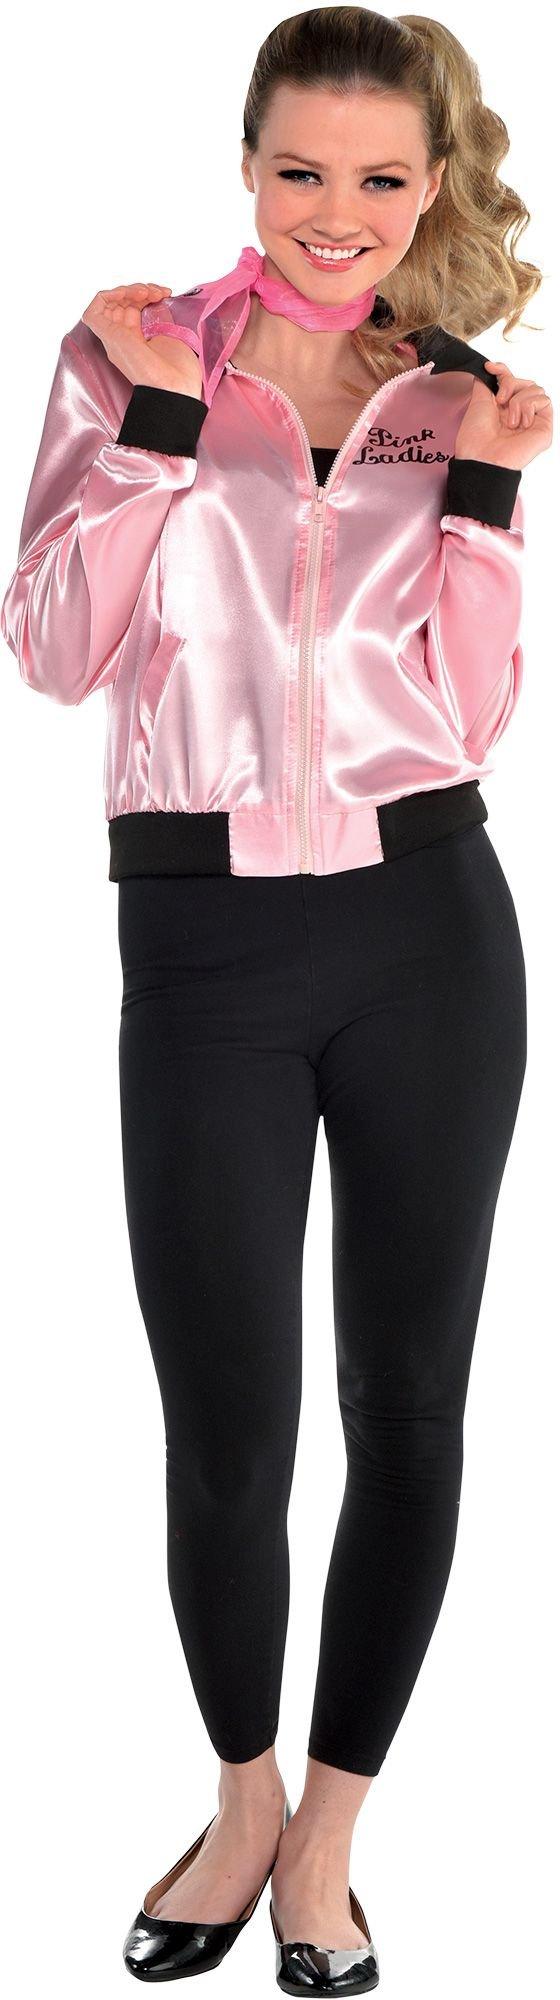 Grease Costumes for Kids, Adults & Couples | Party City